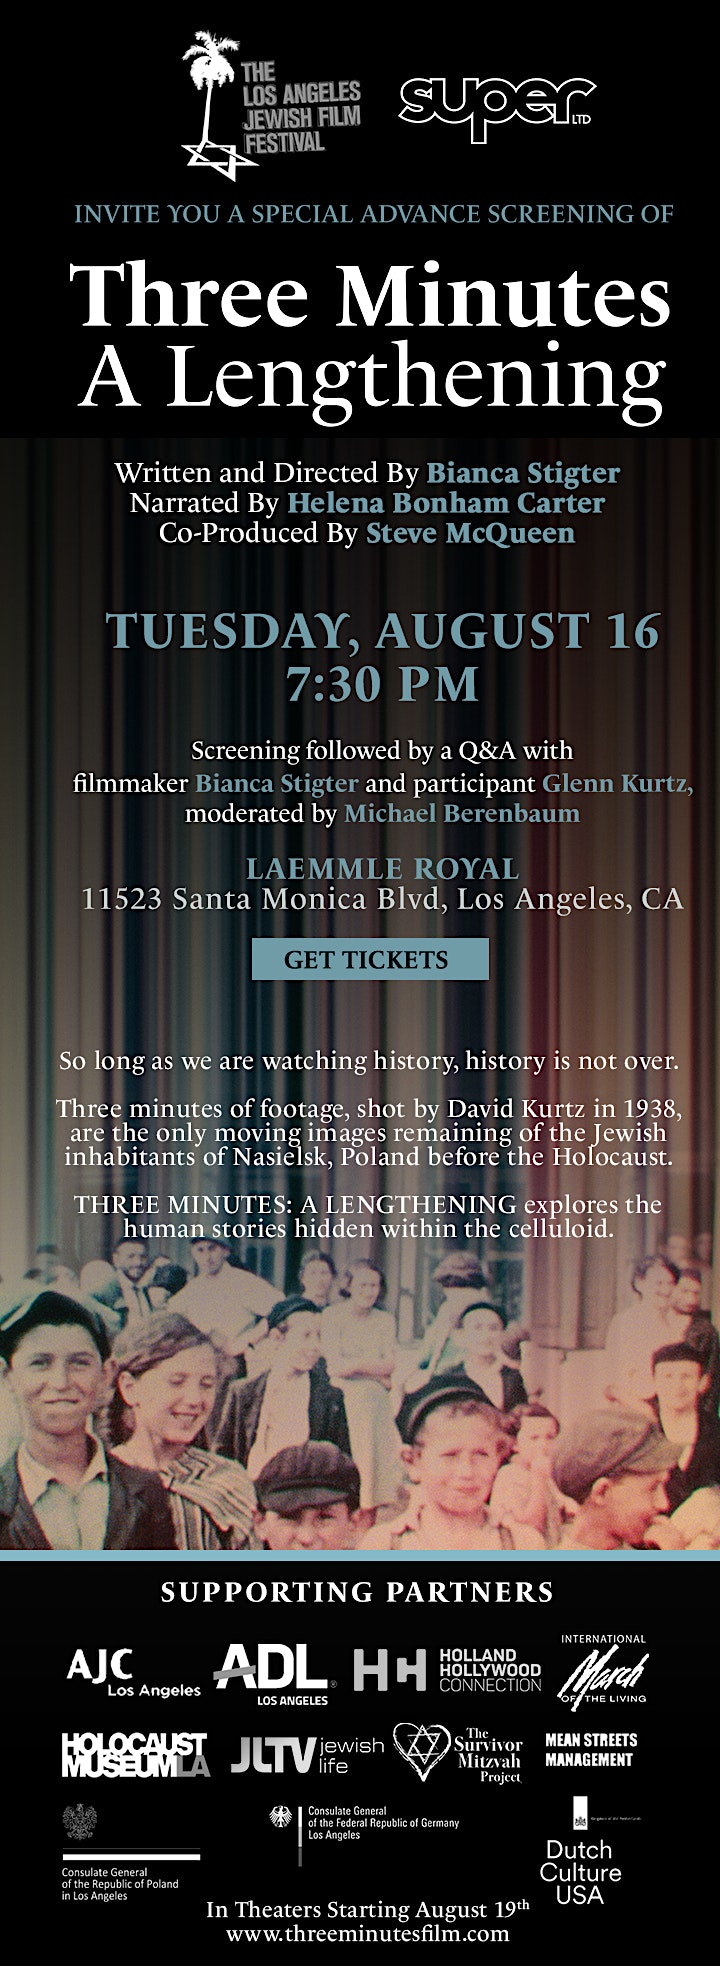 LA Premiere! Sneak Preview of  “THREE MINUTES – A Lengthening” with Q&A image